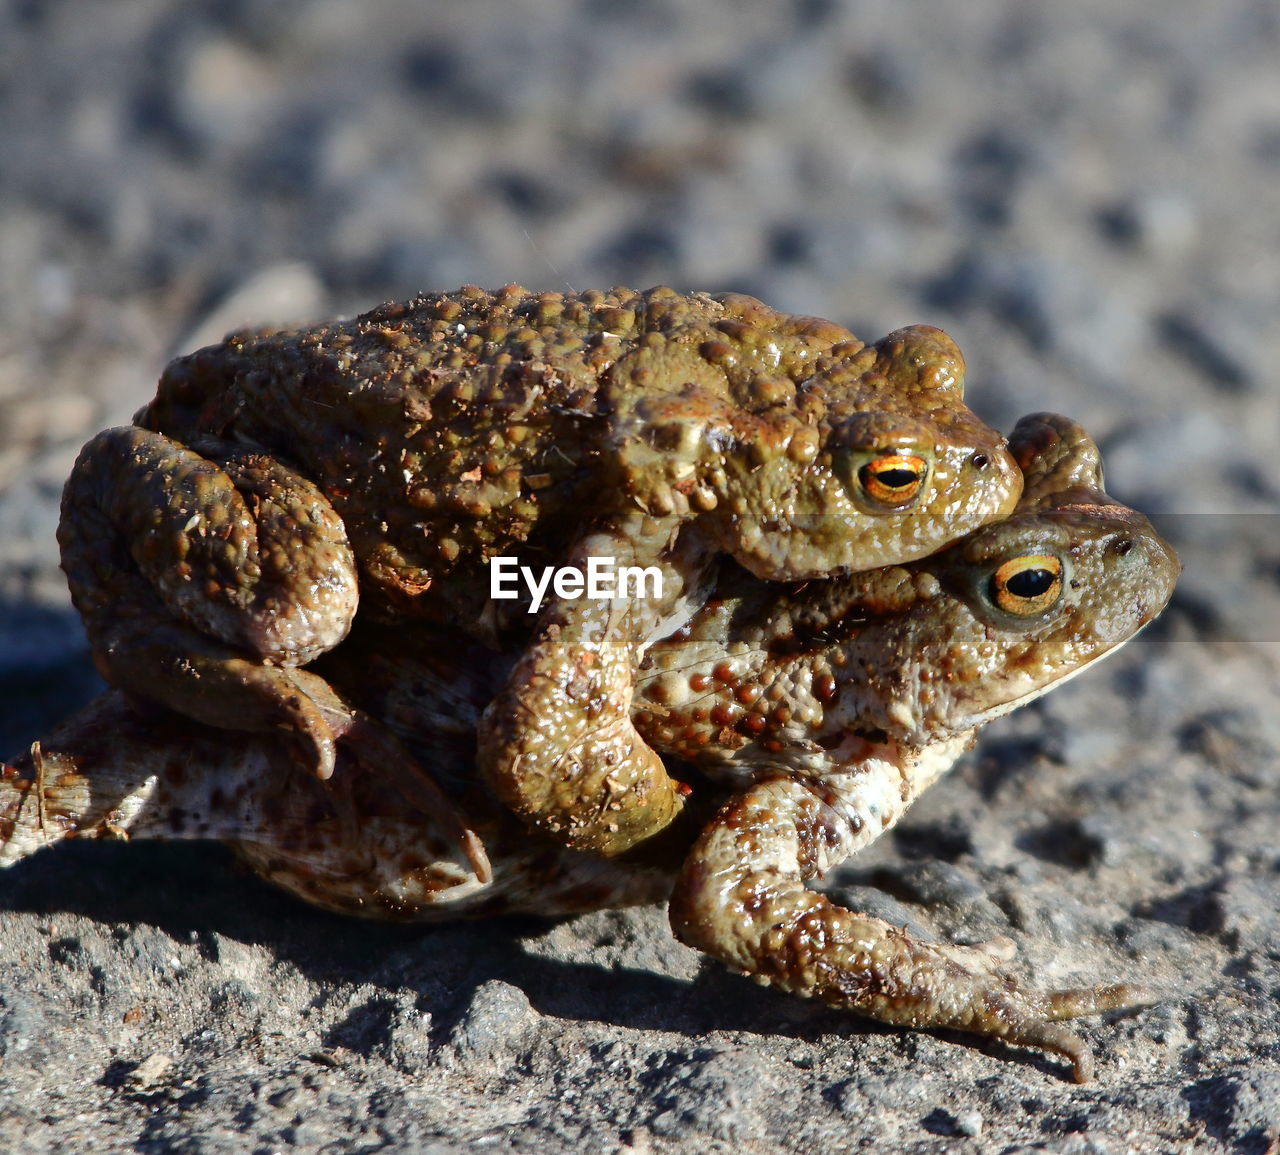 CLOSE-UP OF FROG